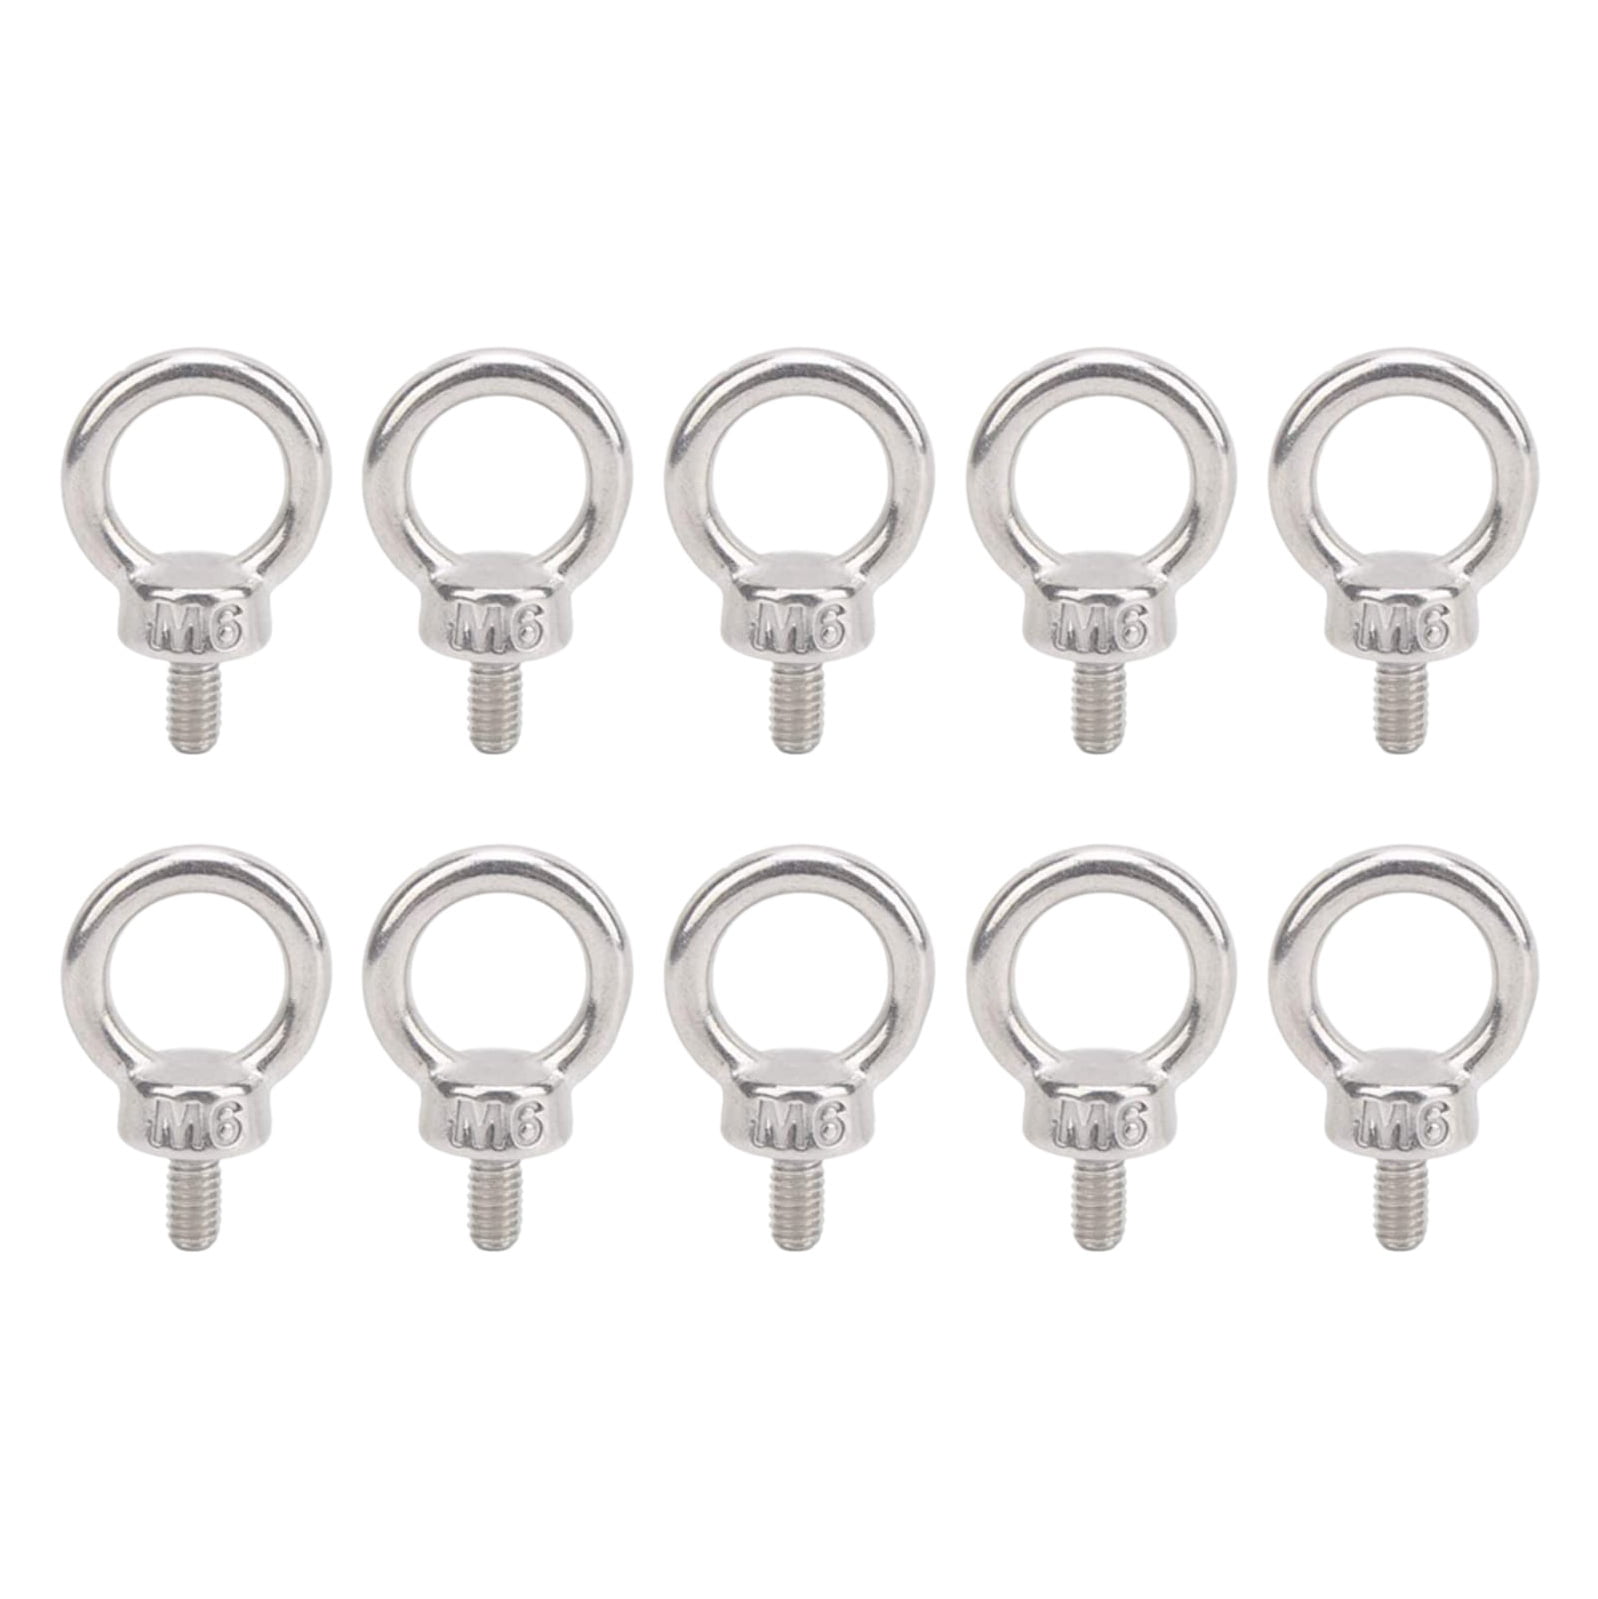 Size: M5 Screw 10pcs M3 M4 M5 M6 M8 Eye Bolt Stainless Steel Marine Lifting Eye Bolt Ring Screw Loop Hole for Cable Rope Lifting